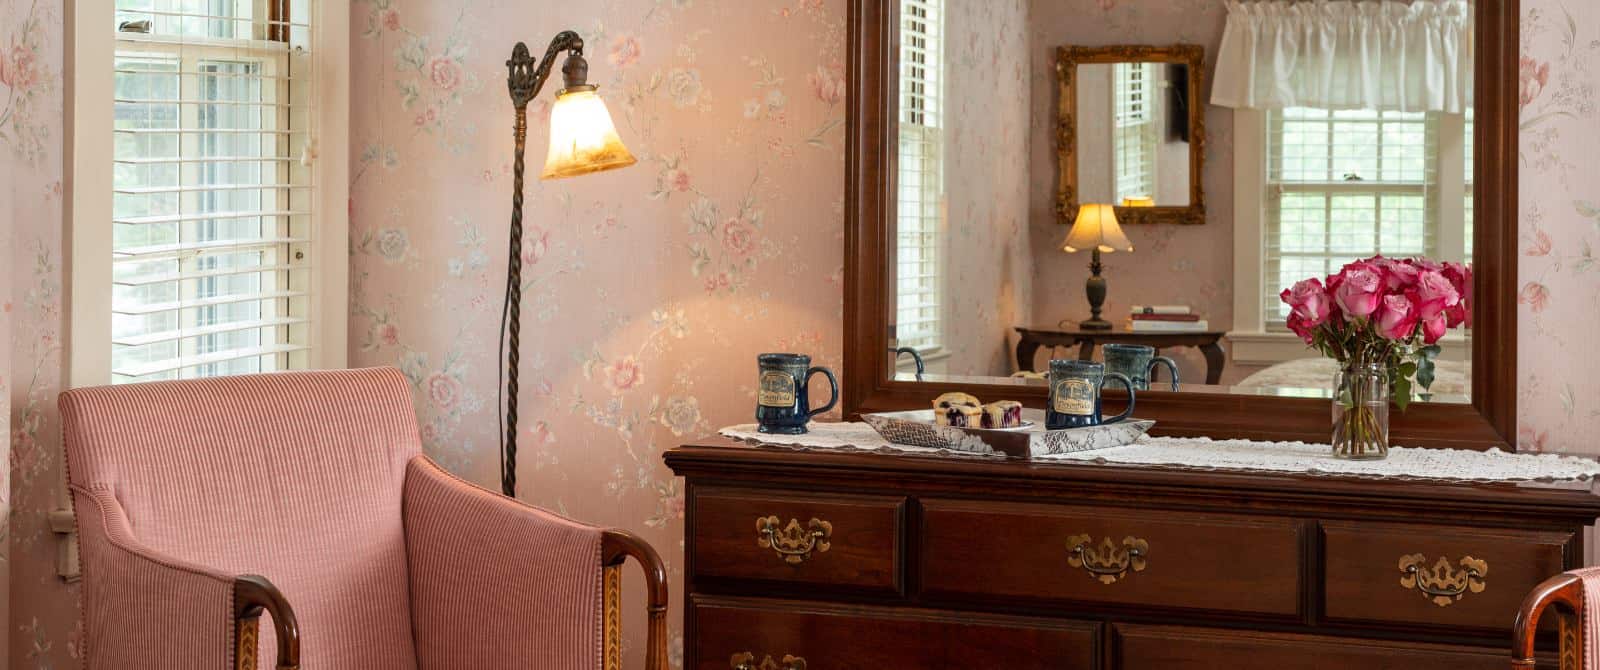 Bedroom with pink floral wall paper, dark wooden dresser with mirror, and pink upholstered antique wooden chair